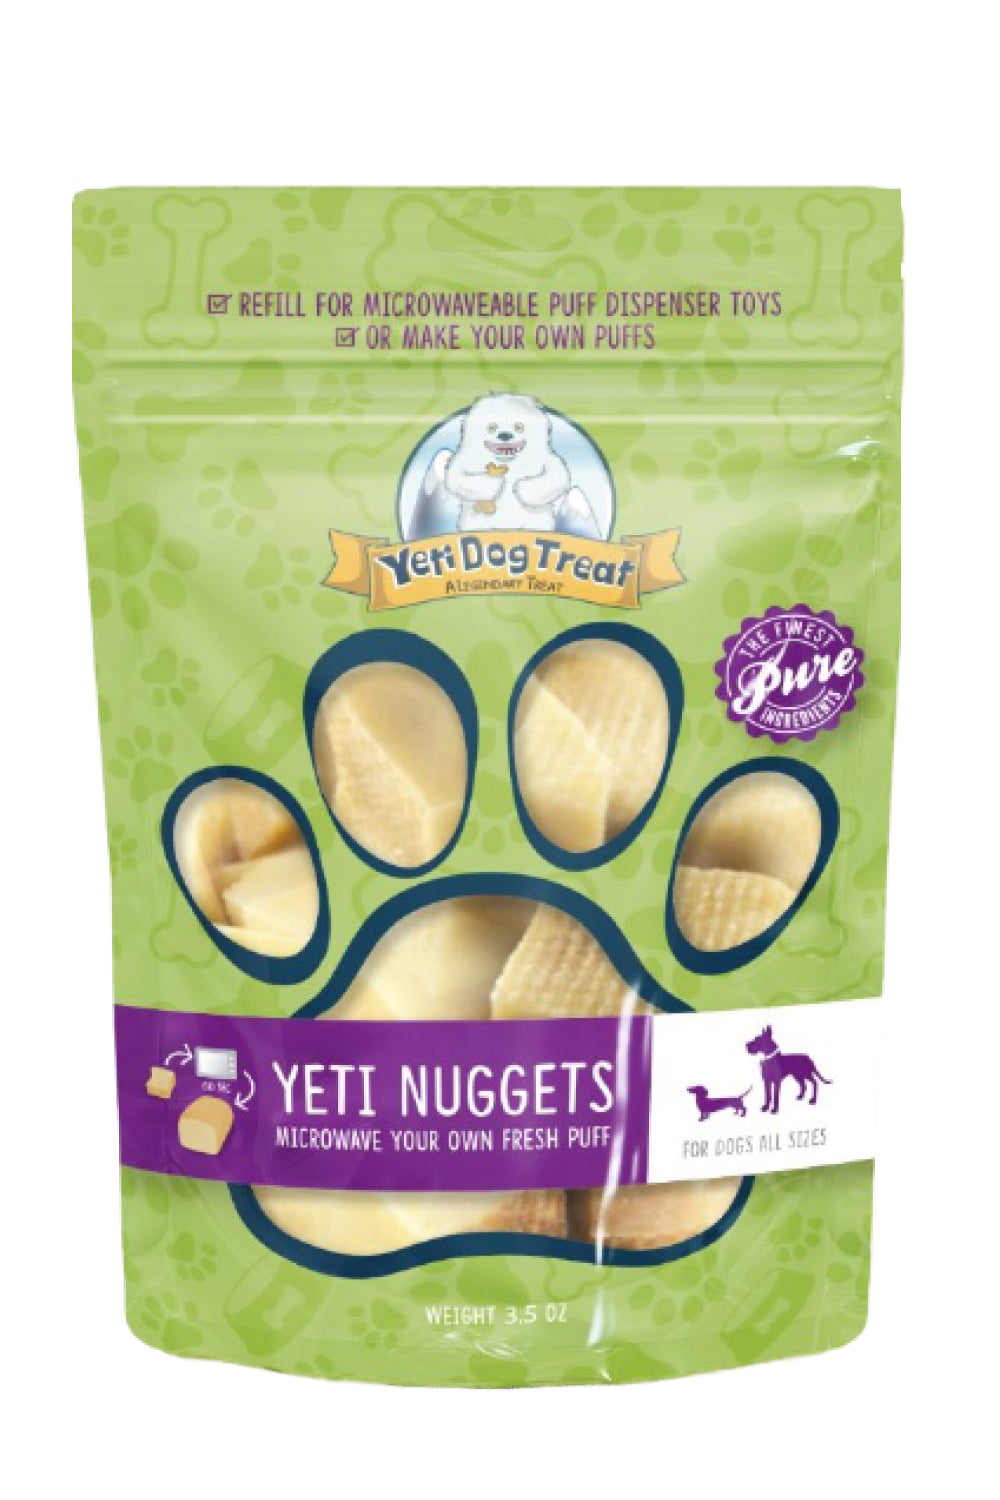 Yeti Nuggets (6 pieces)